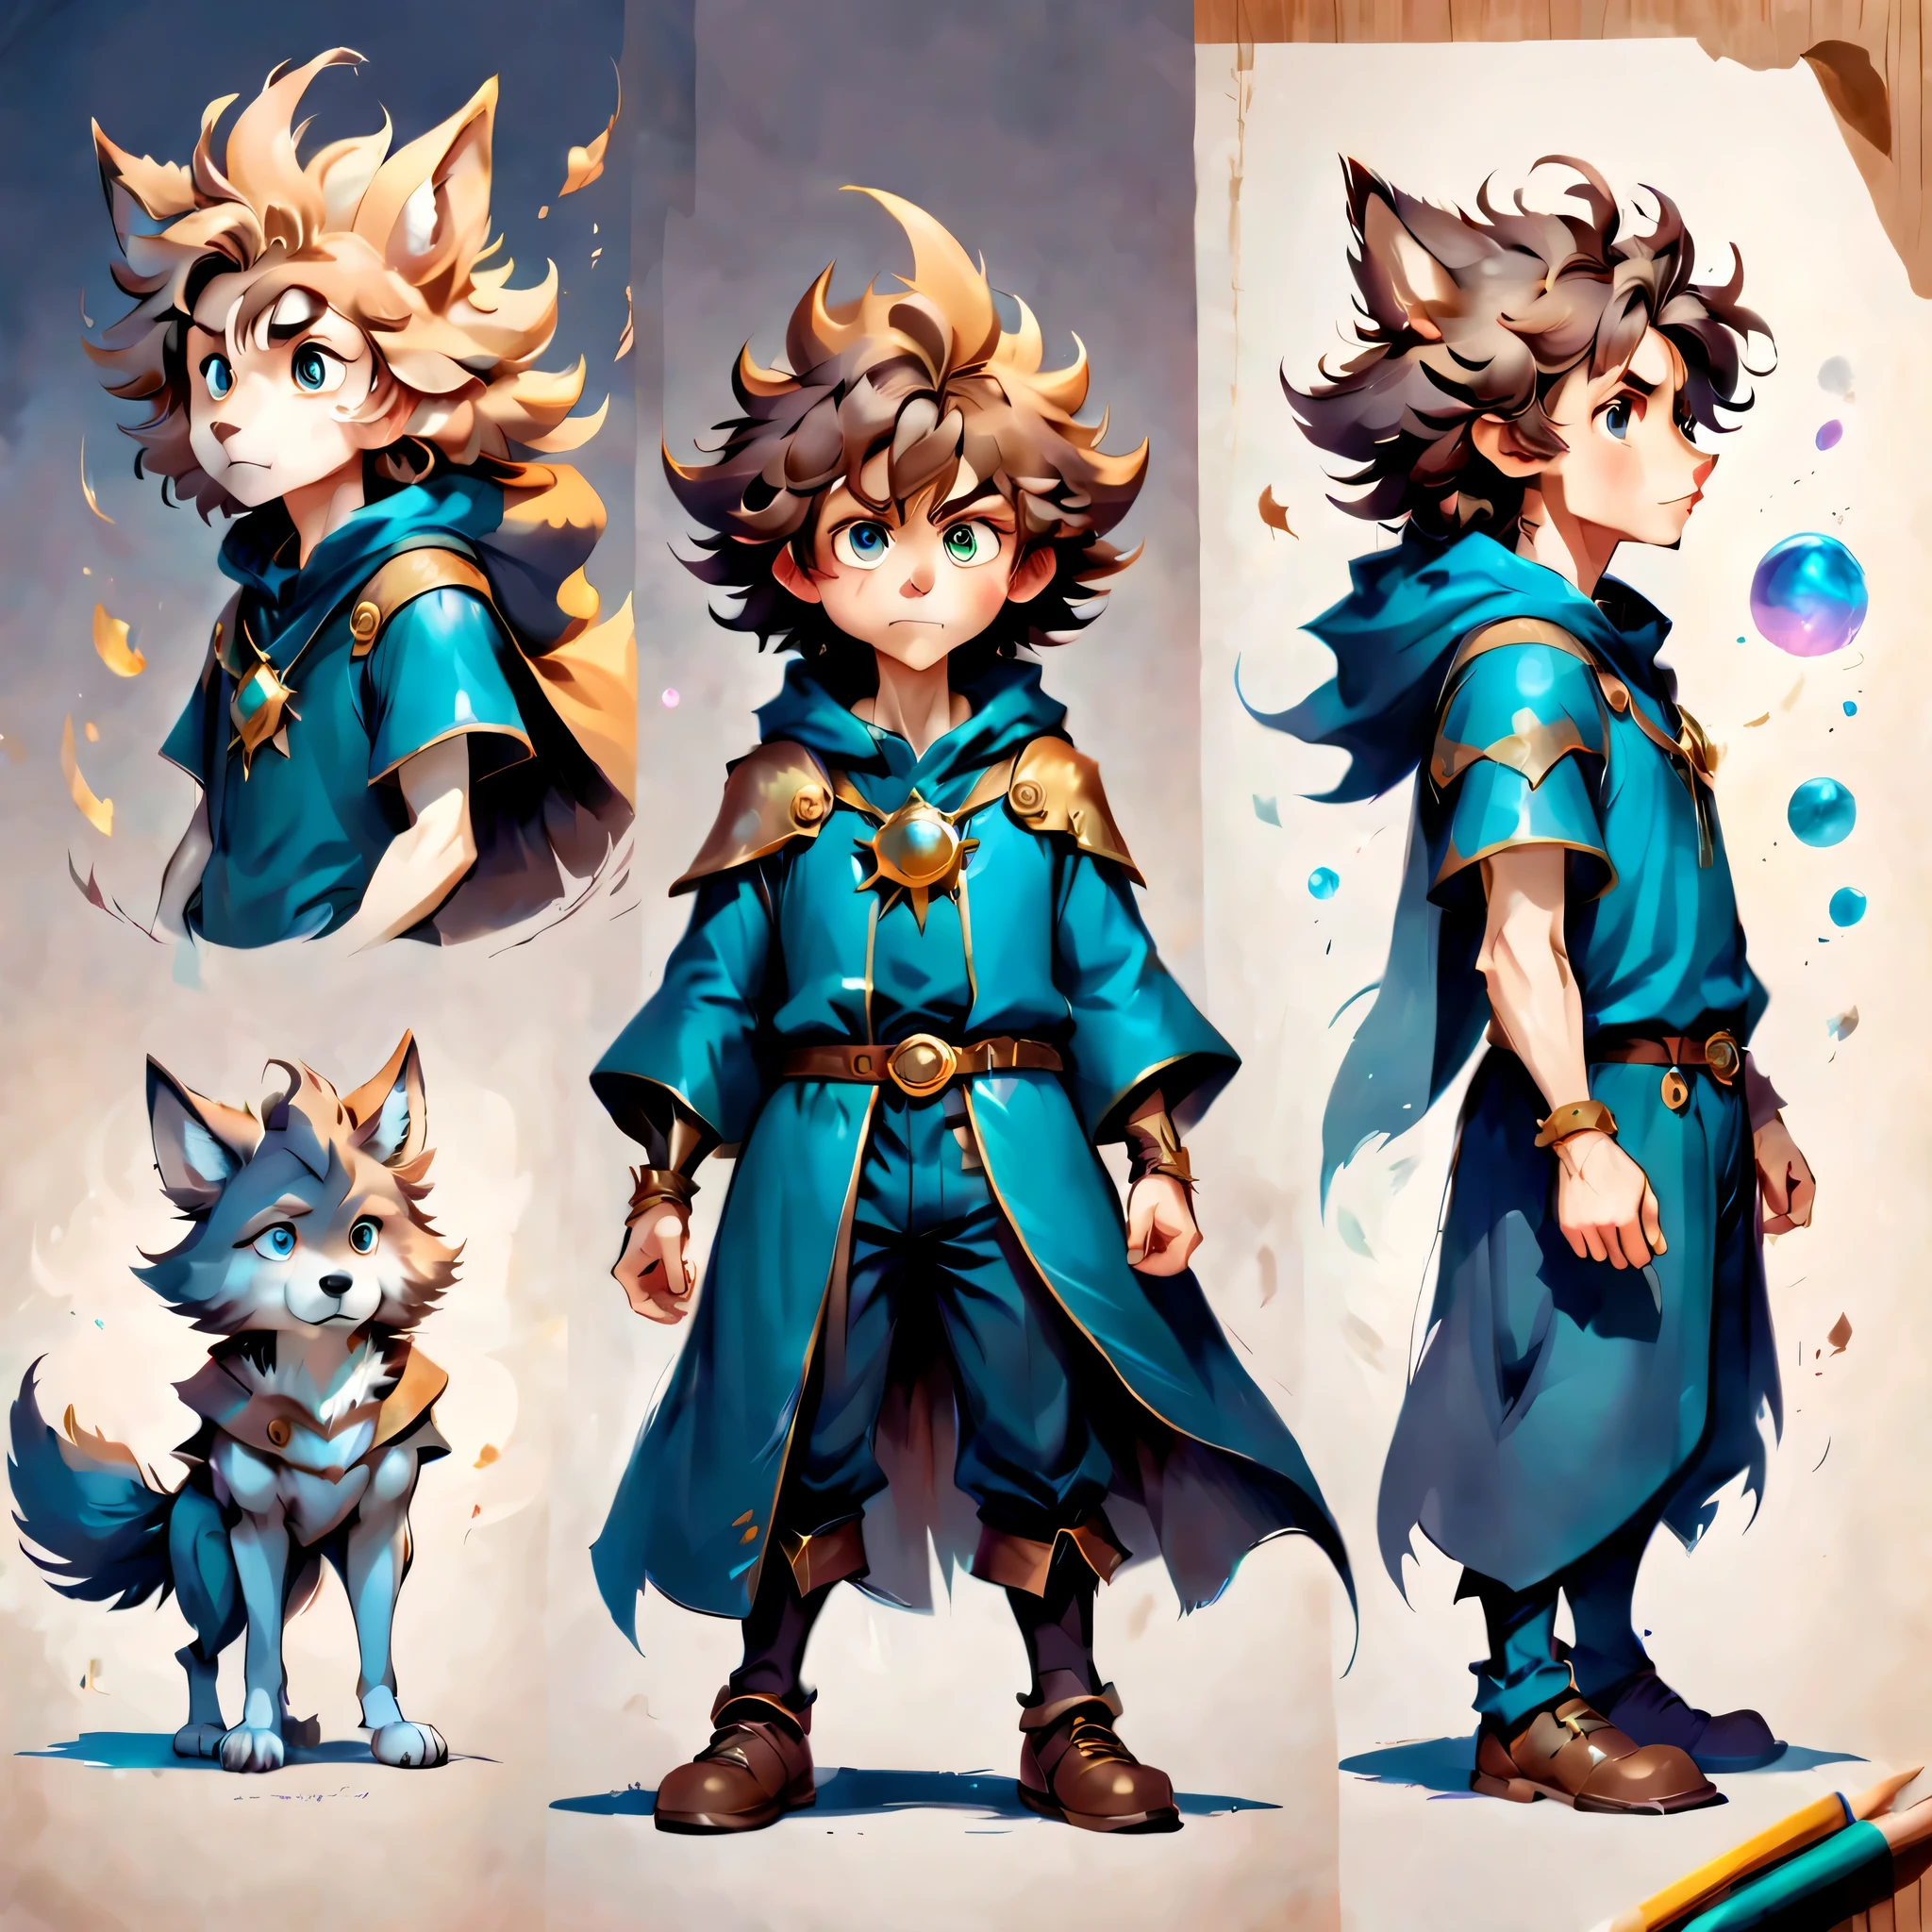 Create an original character design sheet,anime main character,boy,wizard,natural perm,my partner is a wolf,((3 views,whole body, background,multiple views,High resolution)),be familiar with,multiple views,Active,action pose,dynamic,nice,cute,masterpiece,highest quality,In detail,gracefully,sketch,sketch,ラフsketch,propose